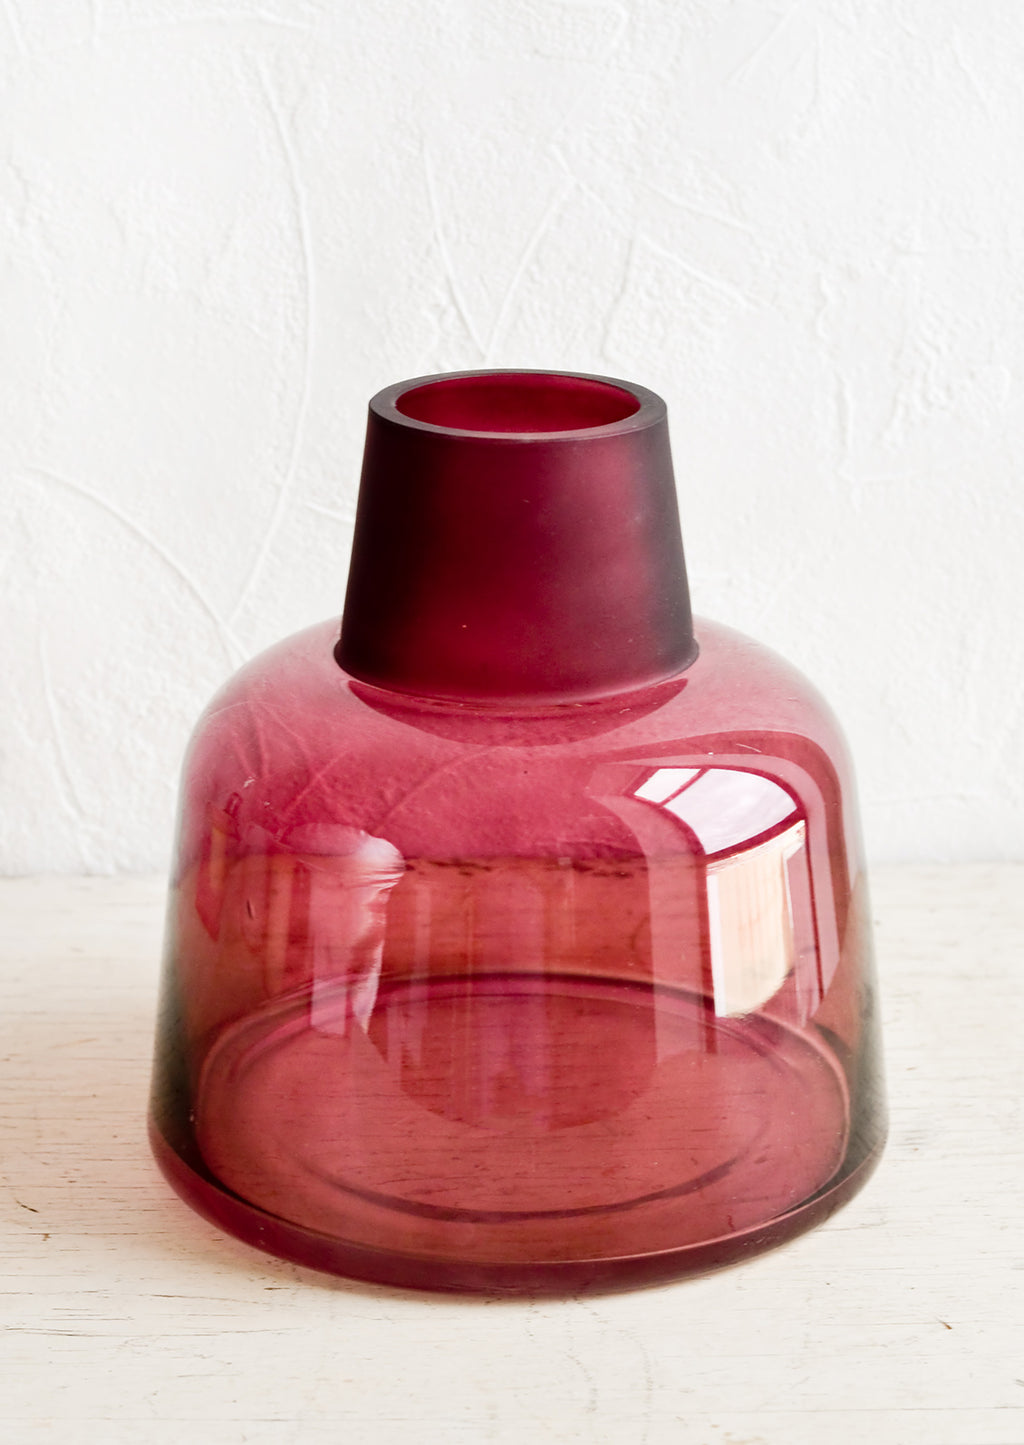 2: A glass vase in polished berry-colored glass with tapered, frosted opening in same color.